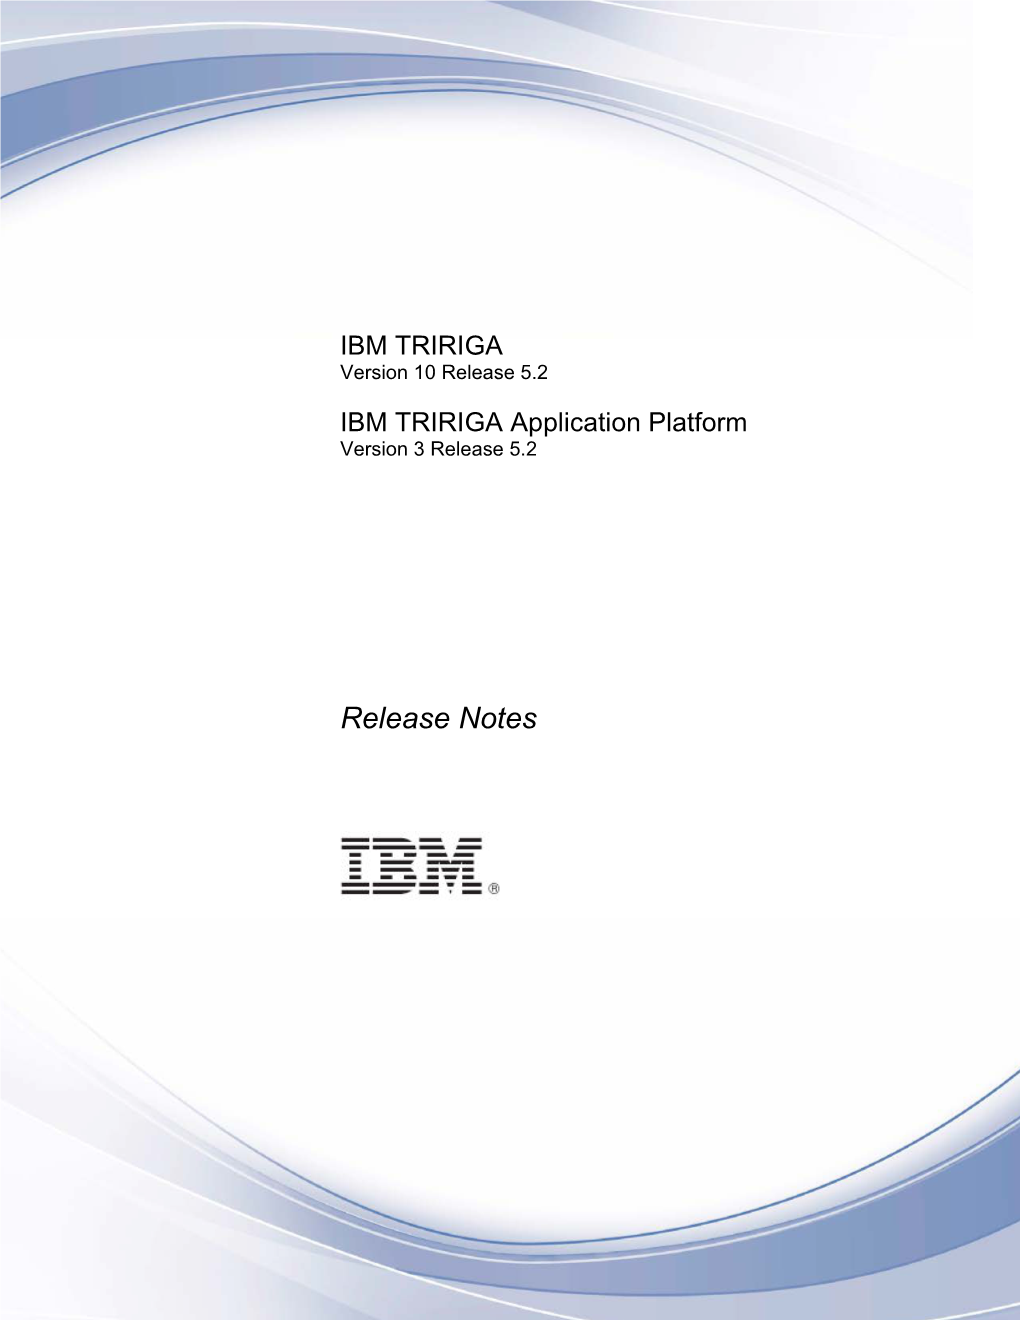 IBM TRIRIGA Release Notes for 10.5.2 and 3.5.2